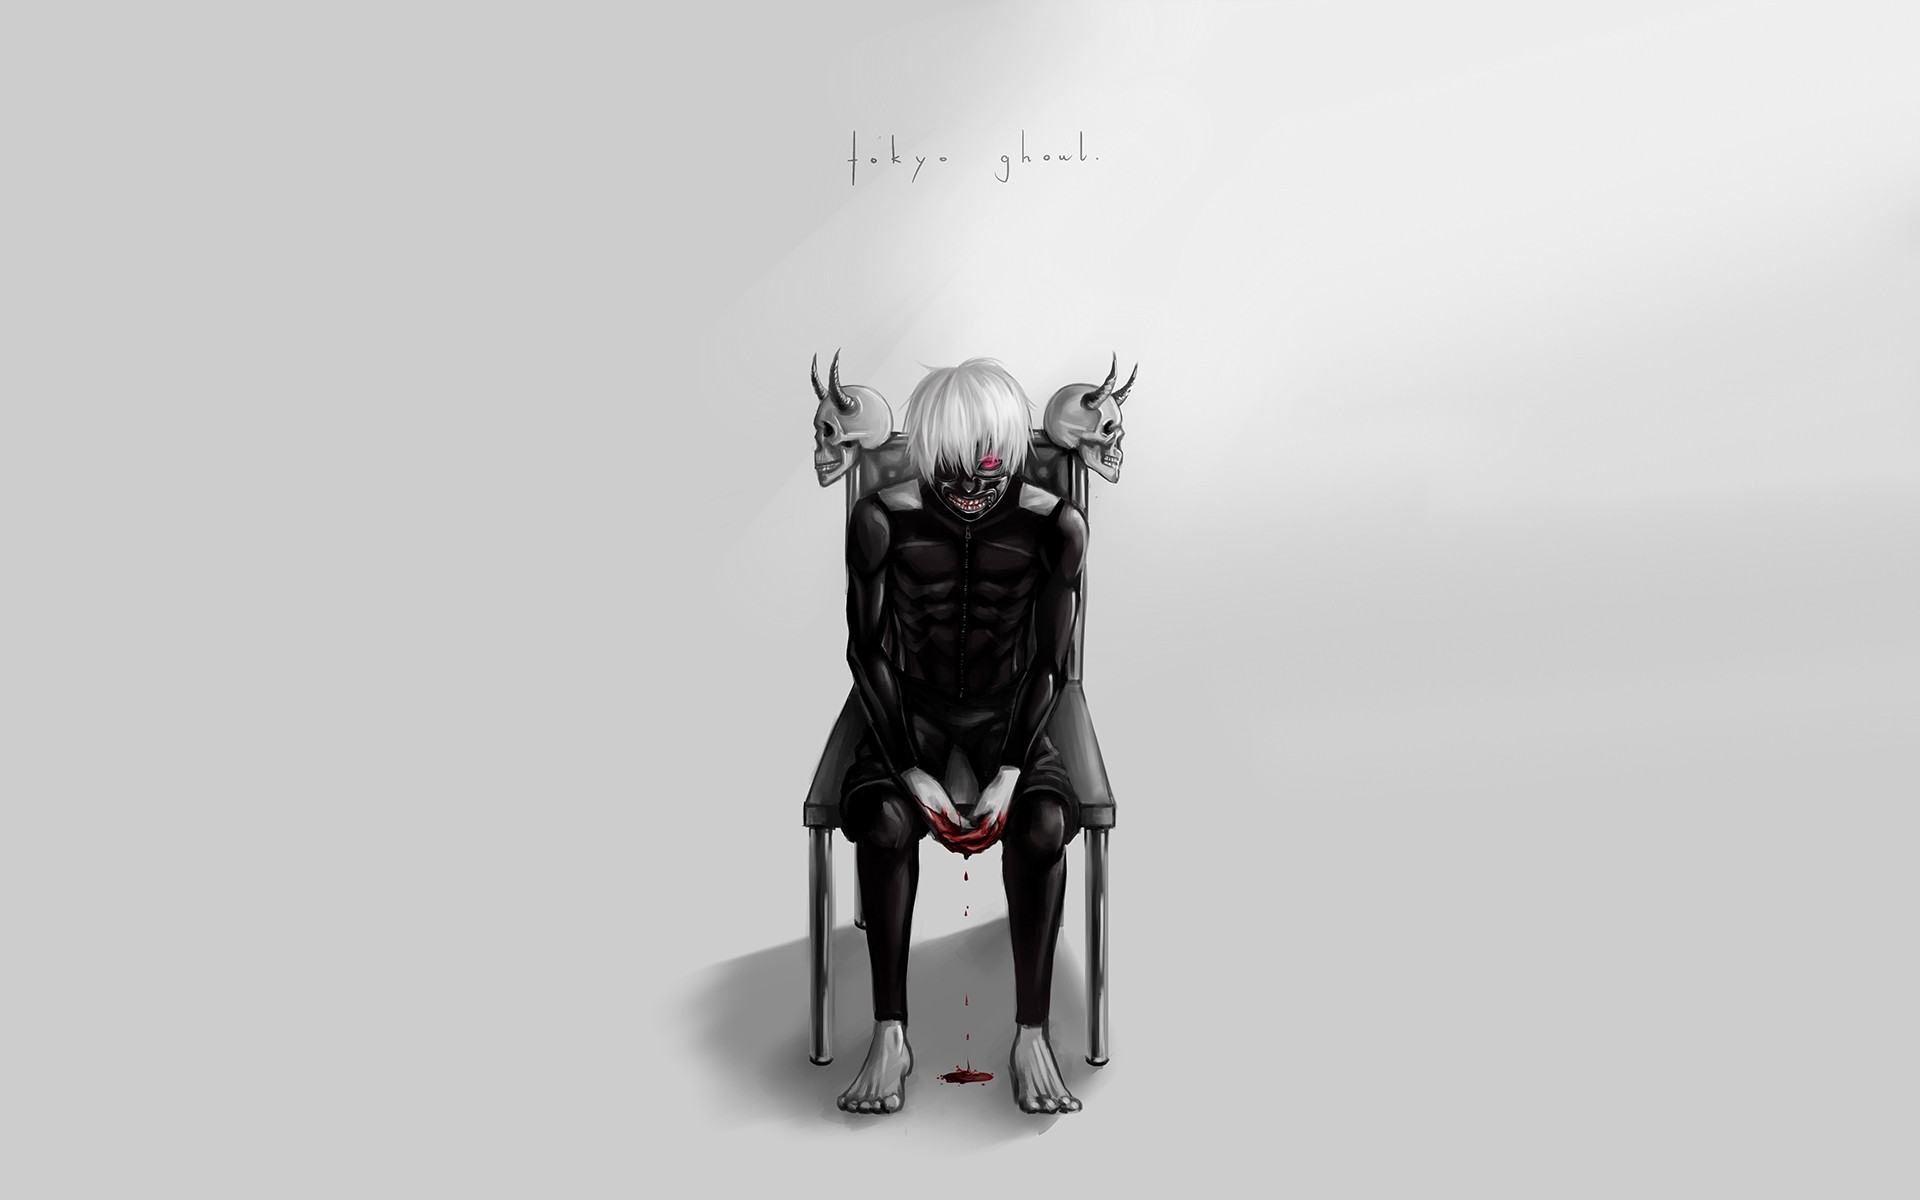 Tokyo Ghoul Wallpaper HD Download Free Cool Backgrounds For